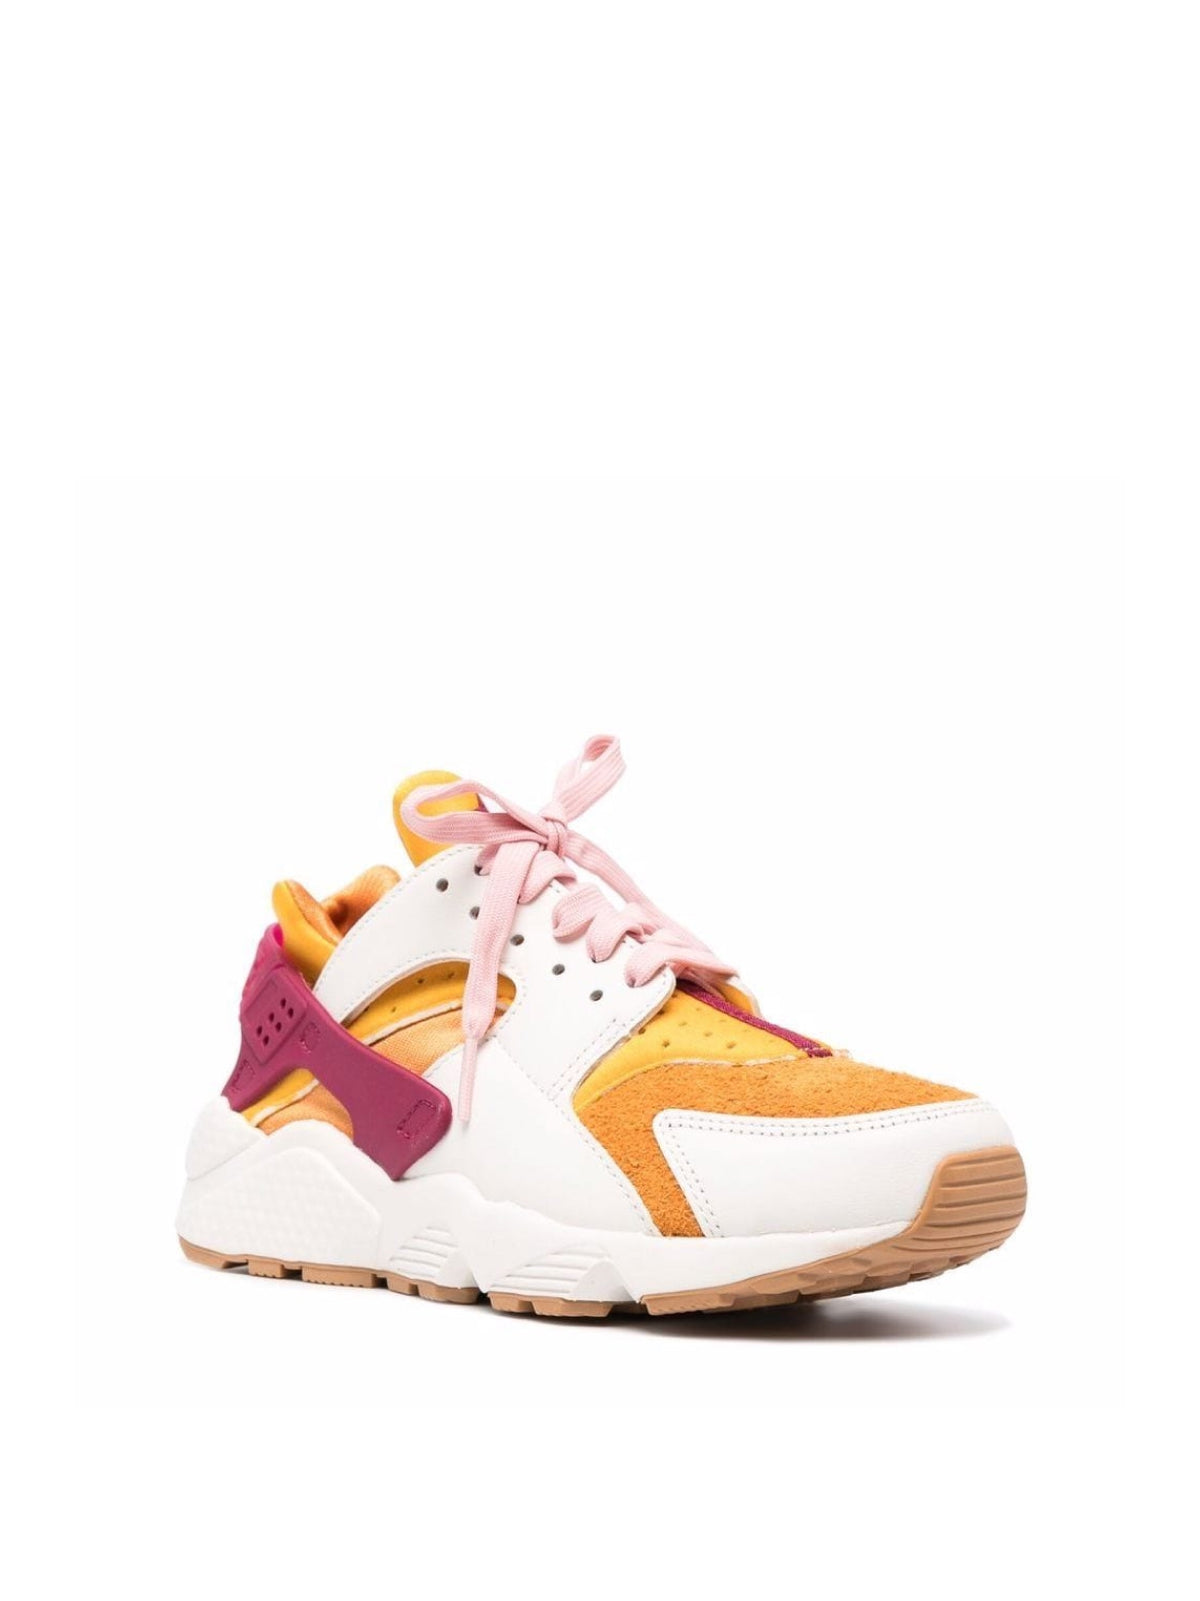 Nike-OUTLET-SALE-Air Huarache NH Colour Therapy Sneakers-ARCHIVIST